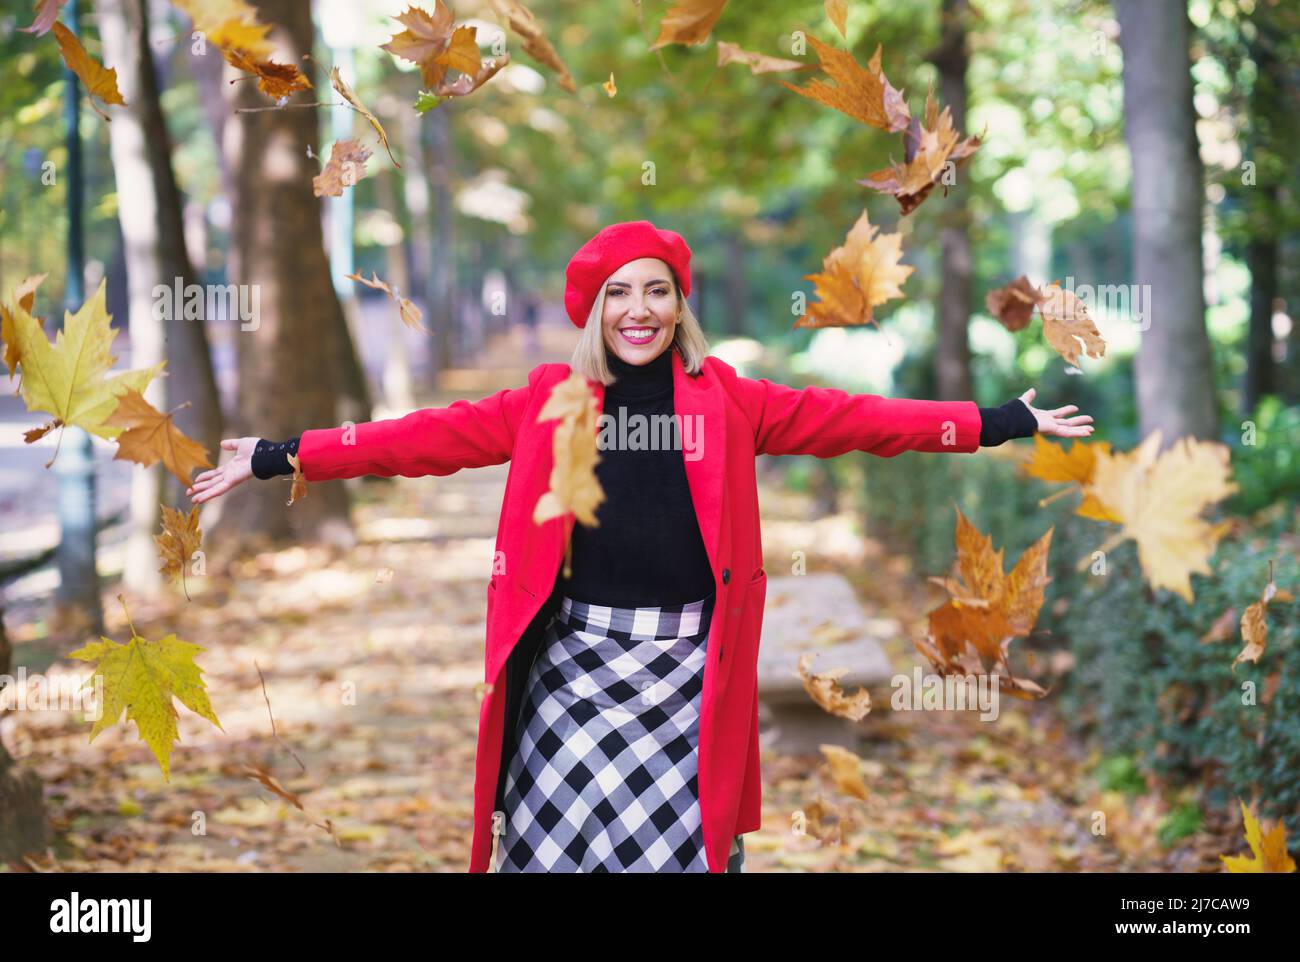 Cheerful woman throwing maple leaves in air Stock Photo